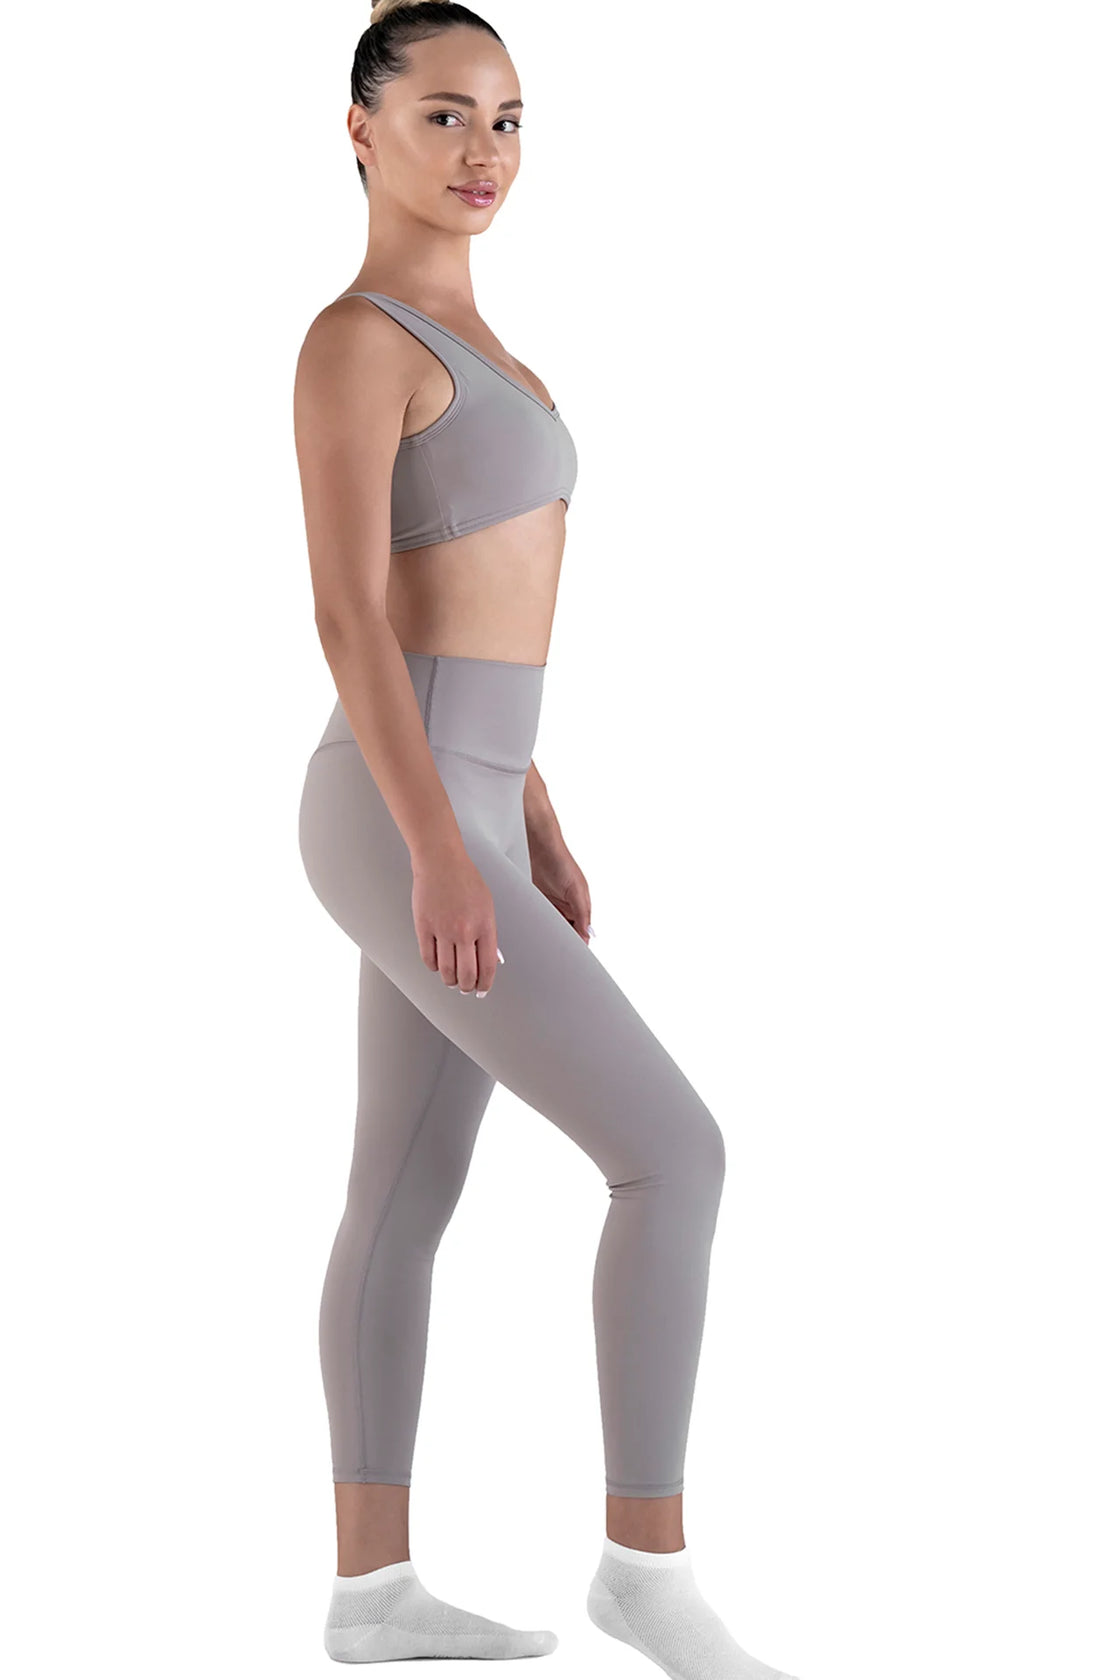 Tan set for women with leggings and bra